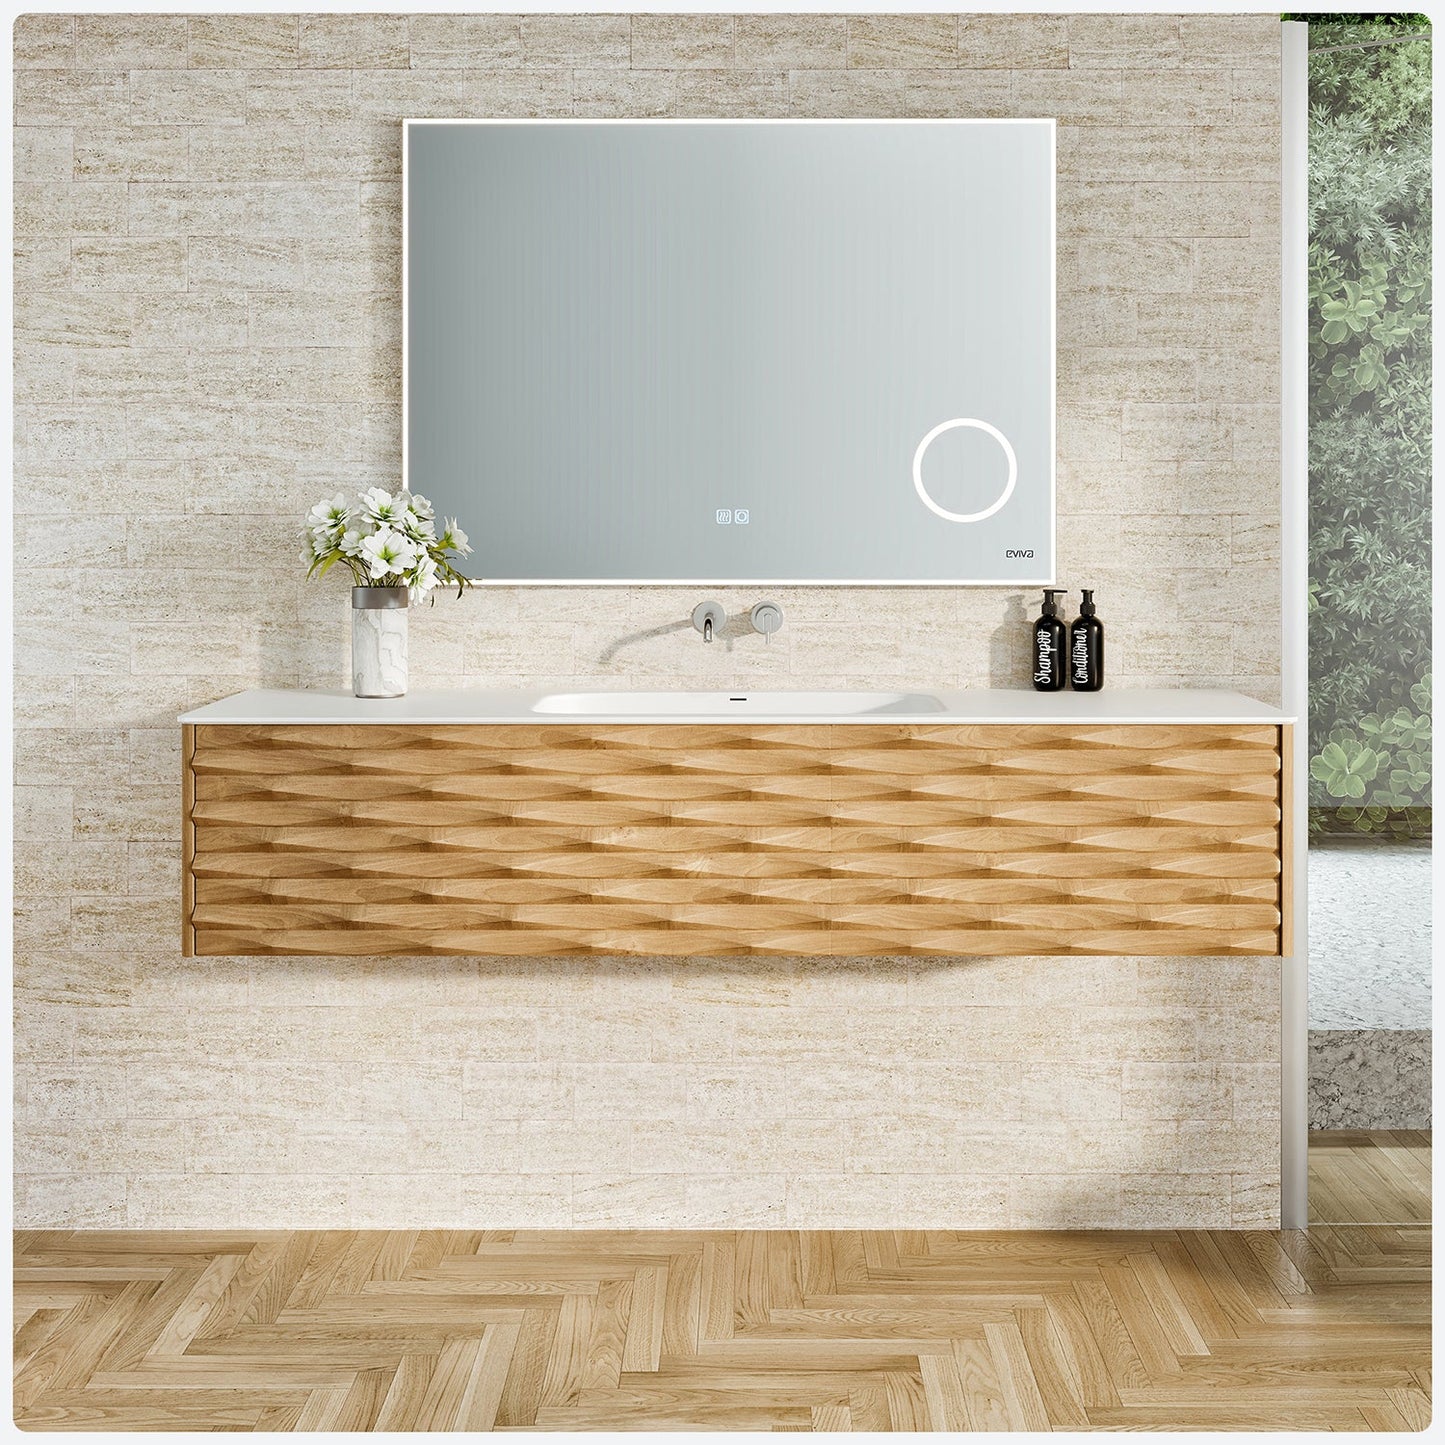 Eviva Oahu 55 Inch Wall Mount Oak Vanity with Solid Surface Integrated Sink